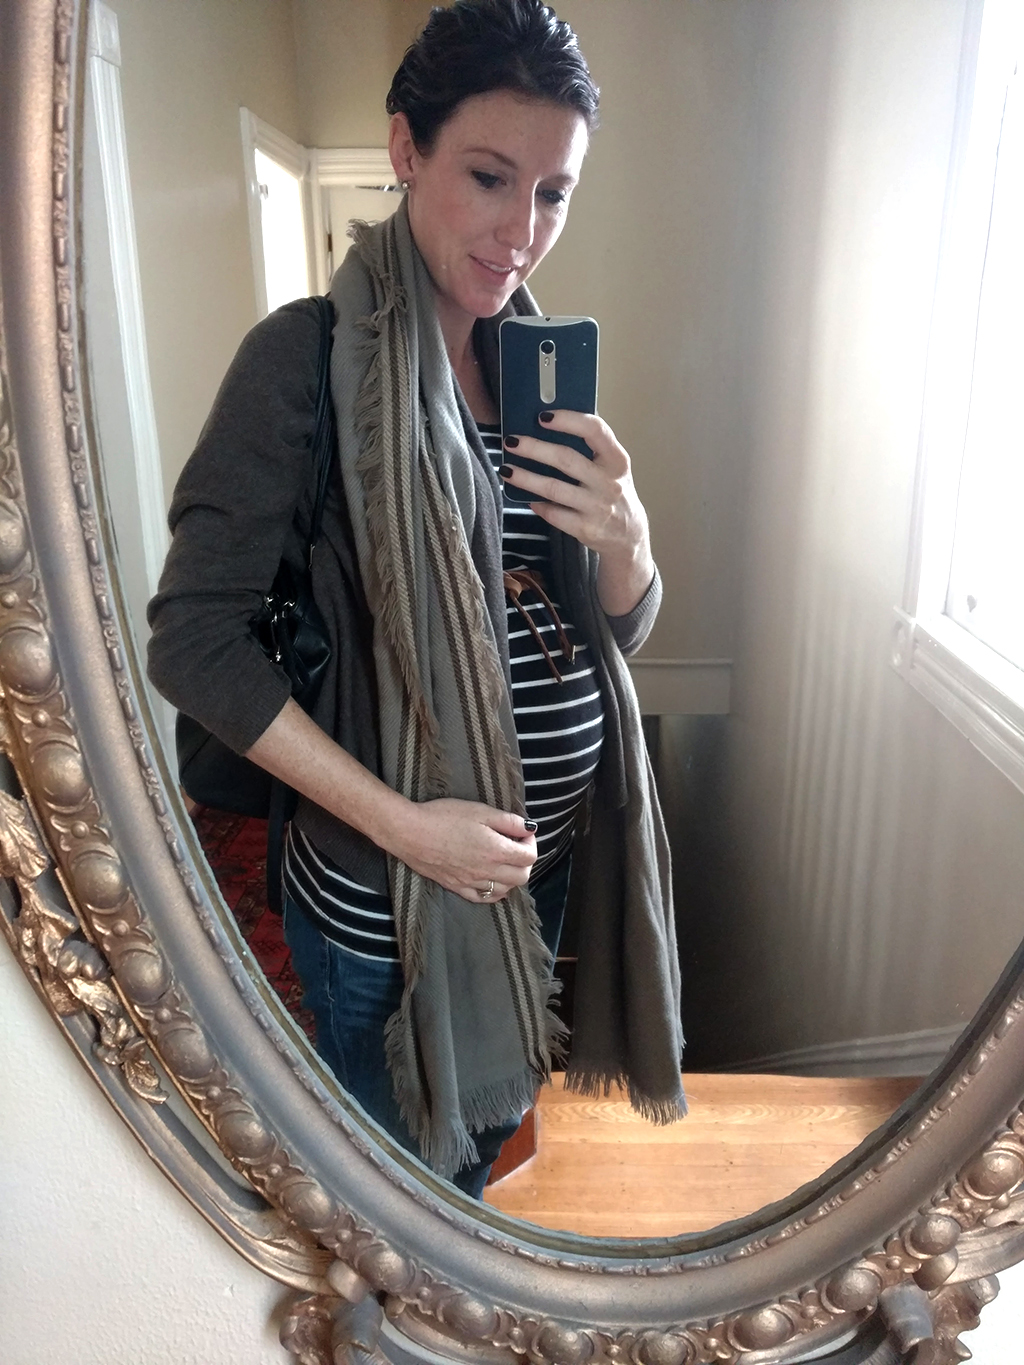 Maternity outfit ideas for 5 months pregnant